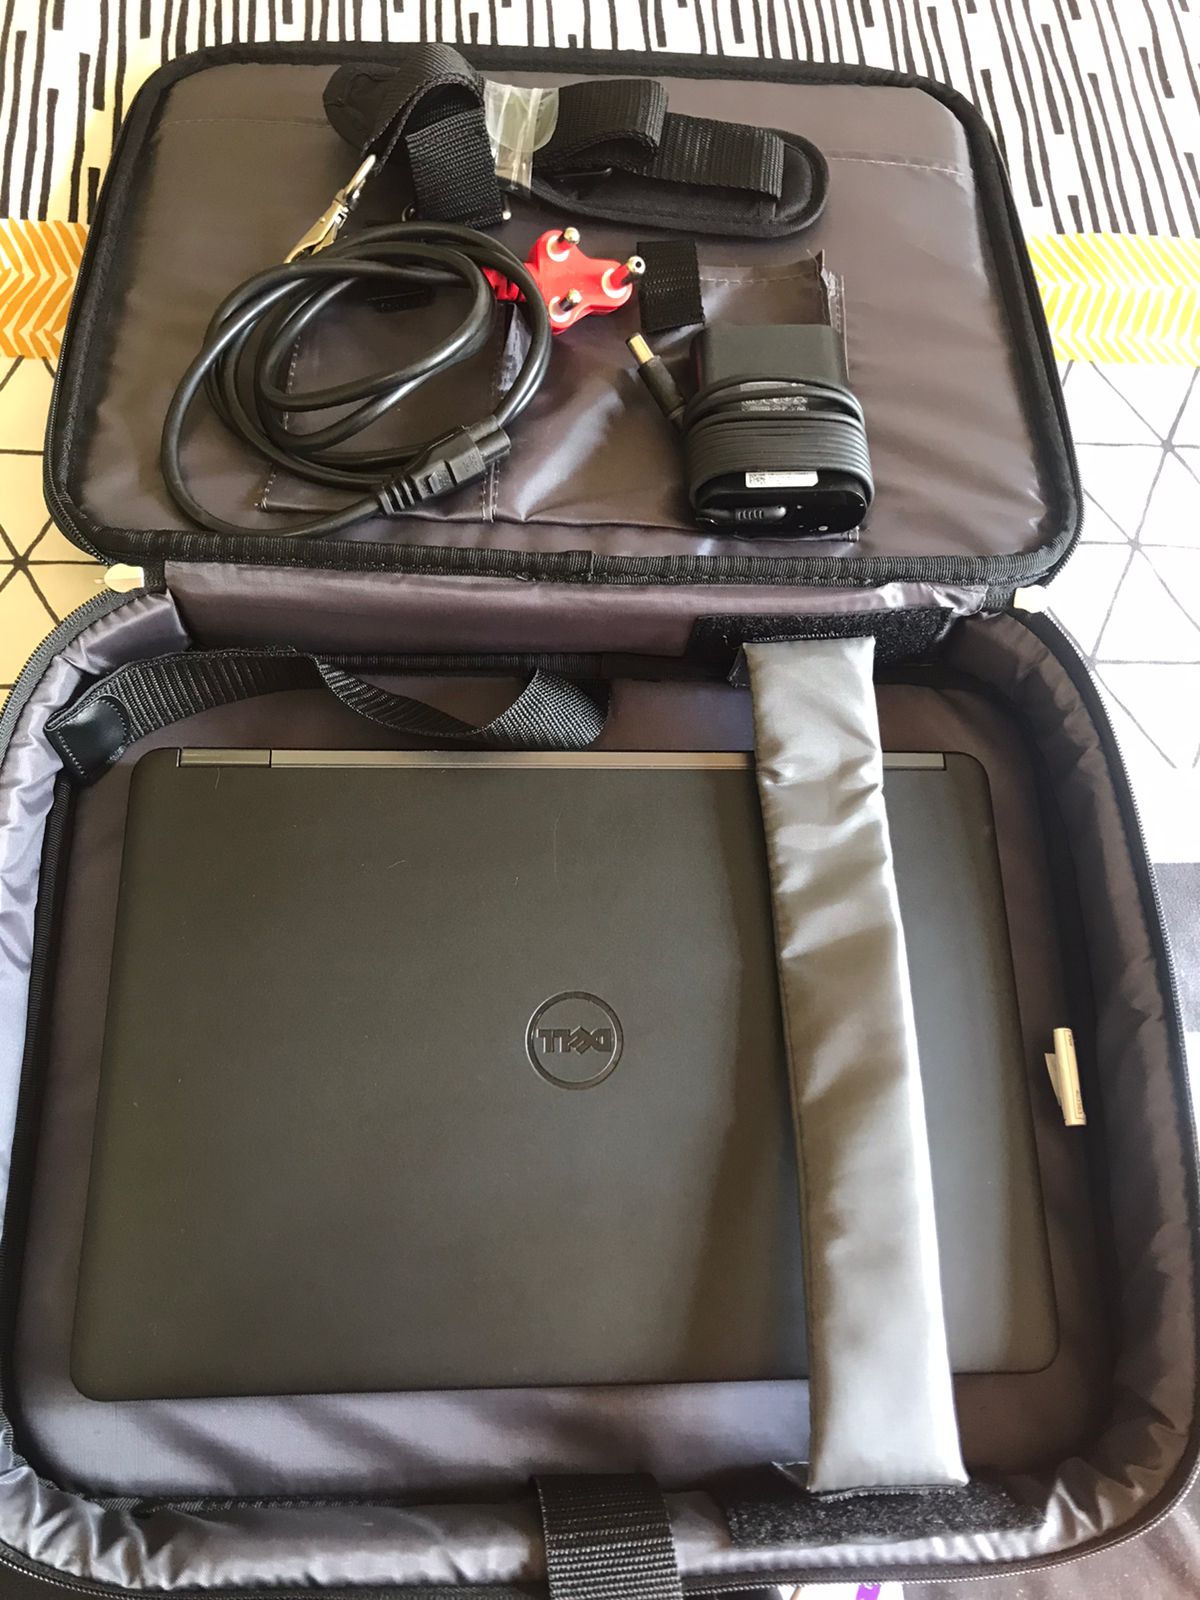 Dell latitude 7450 with its bag.